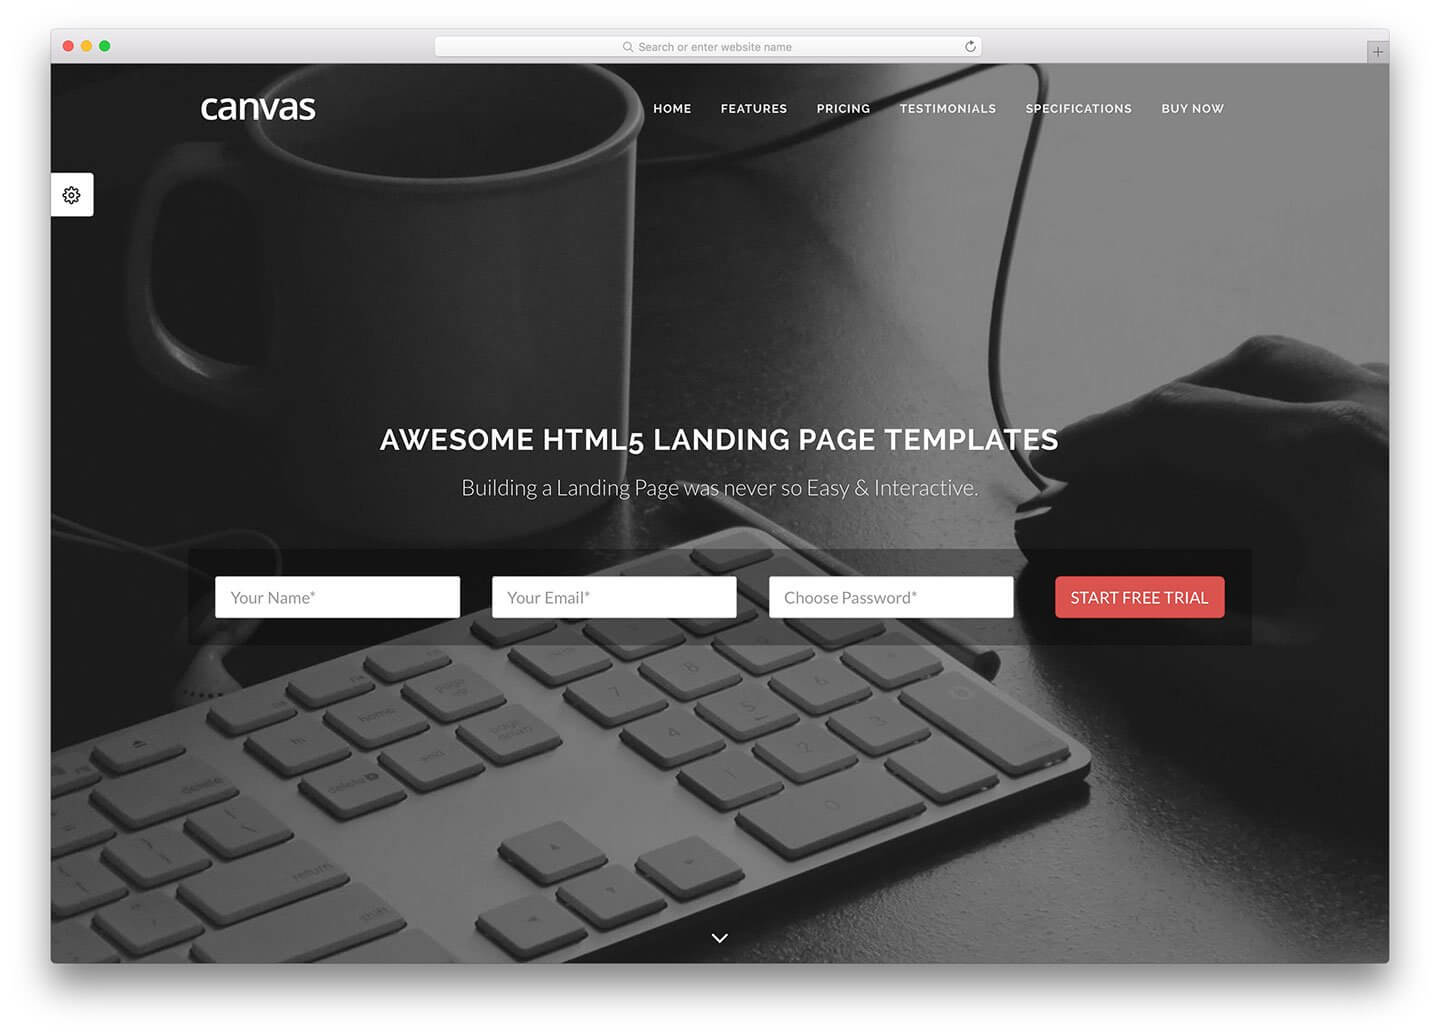 33 Awesome Html5 Landing Page Templates 2019 – Colorlib For Html5 Blank Page Template